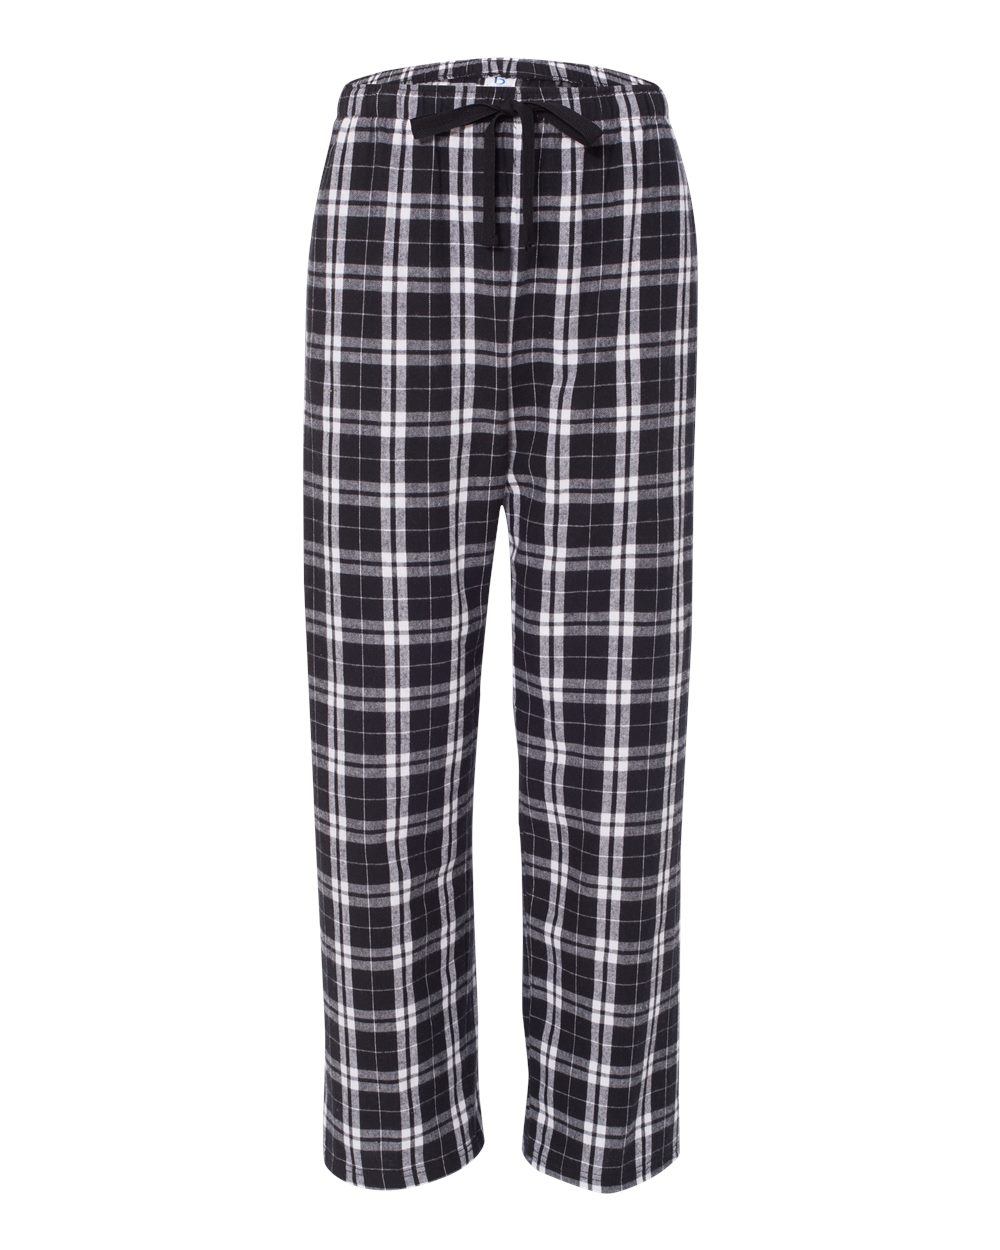 black and white flannel pants